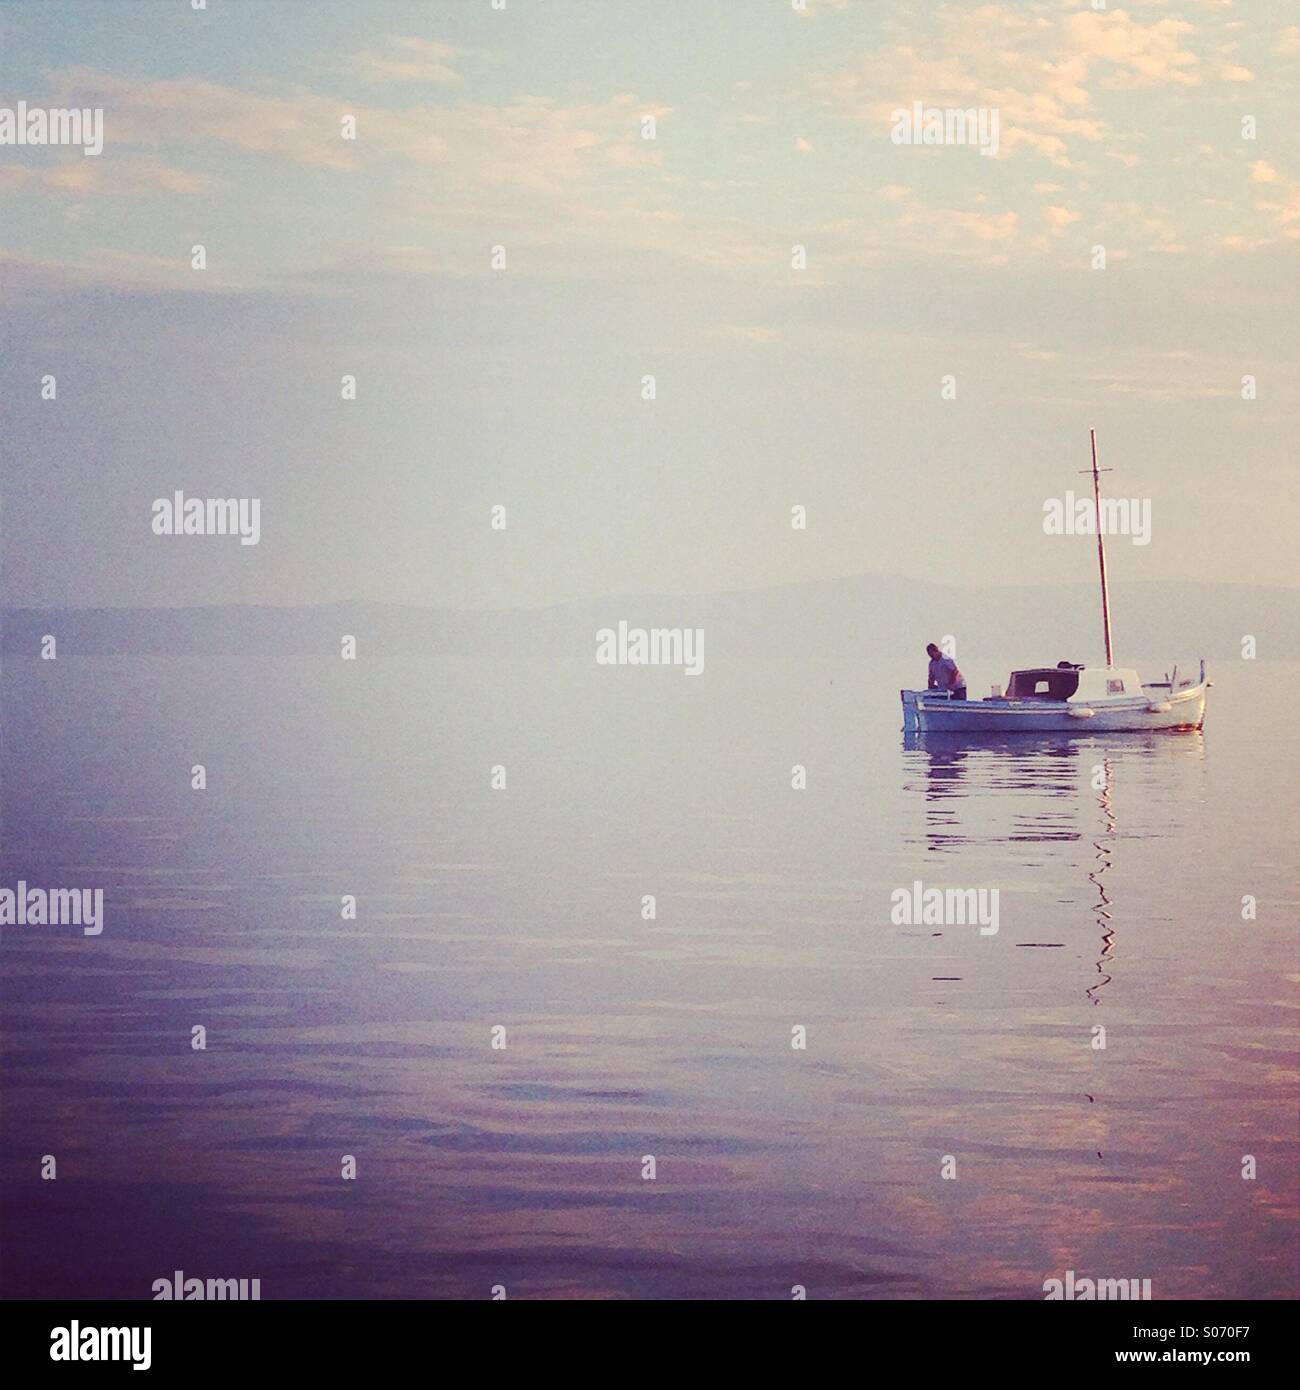 Fisherman on traditional wooden fishing boat Stock Photo